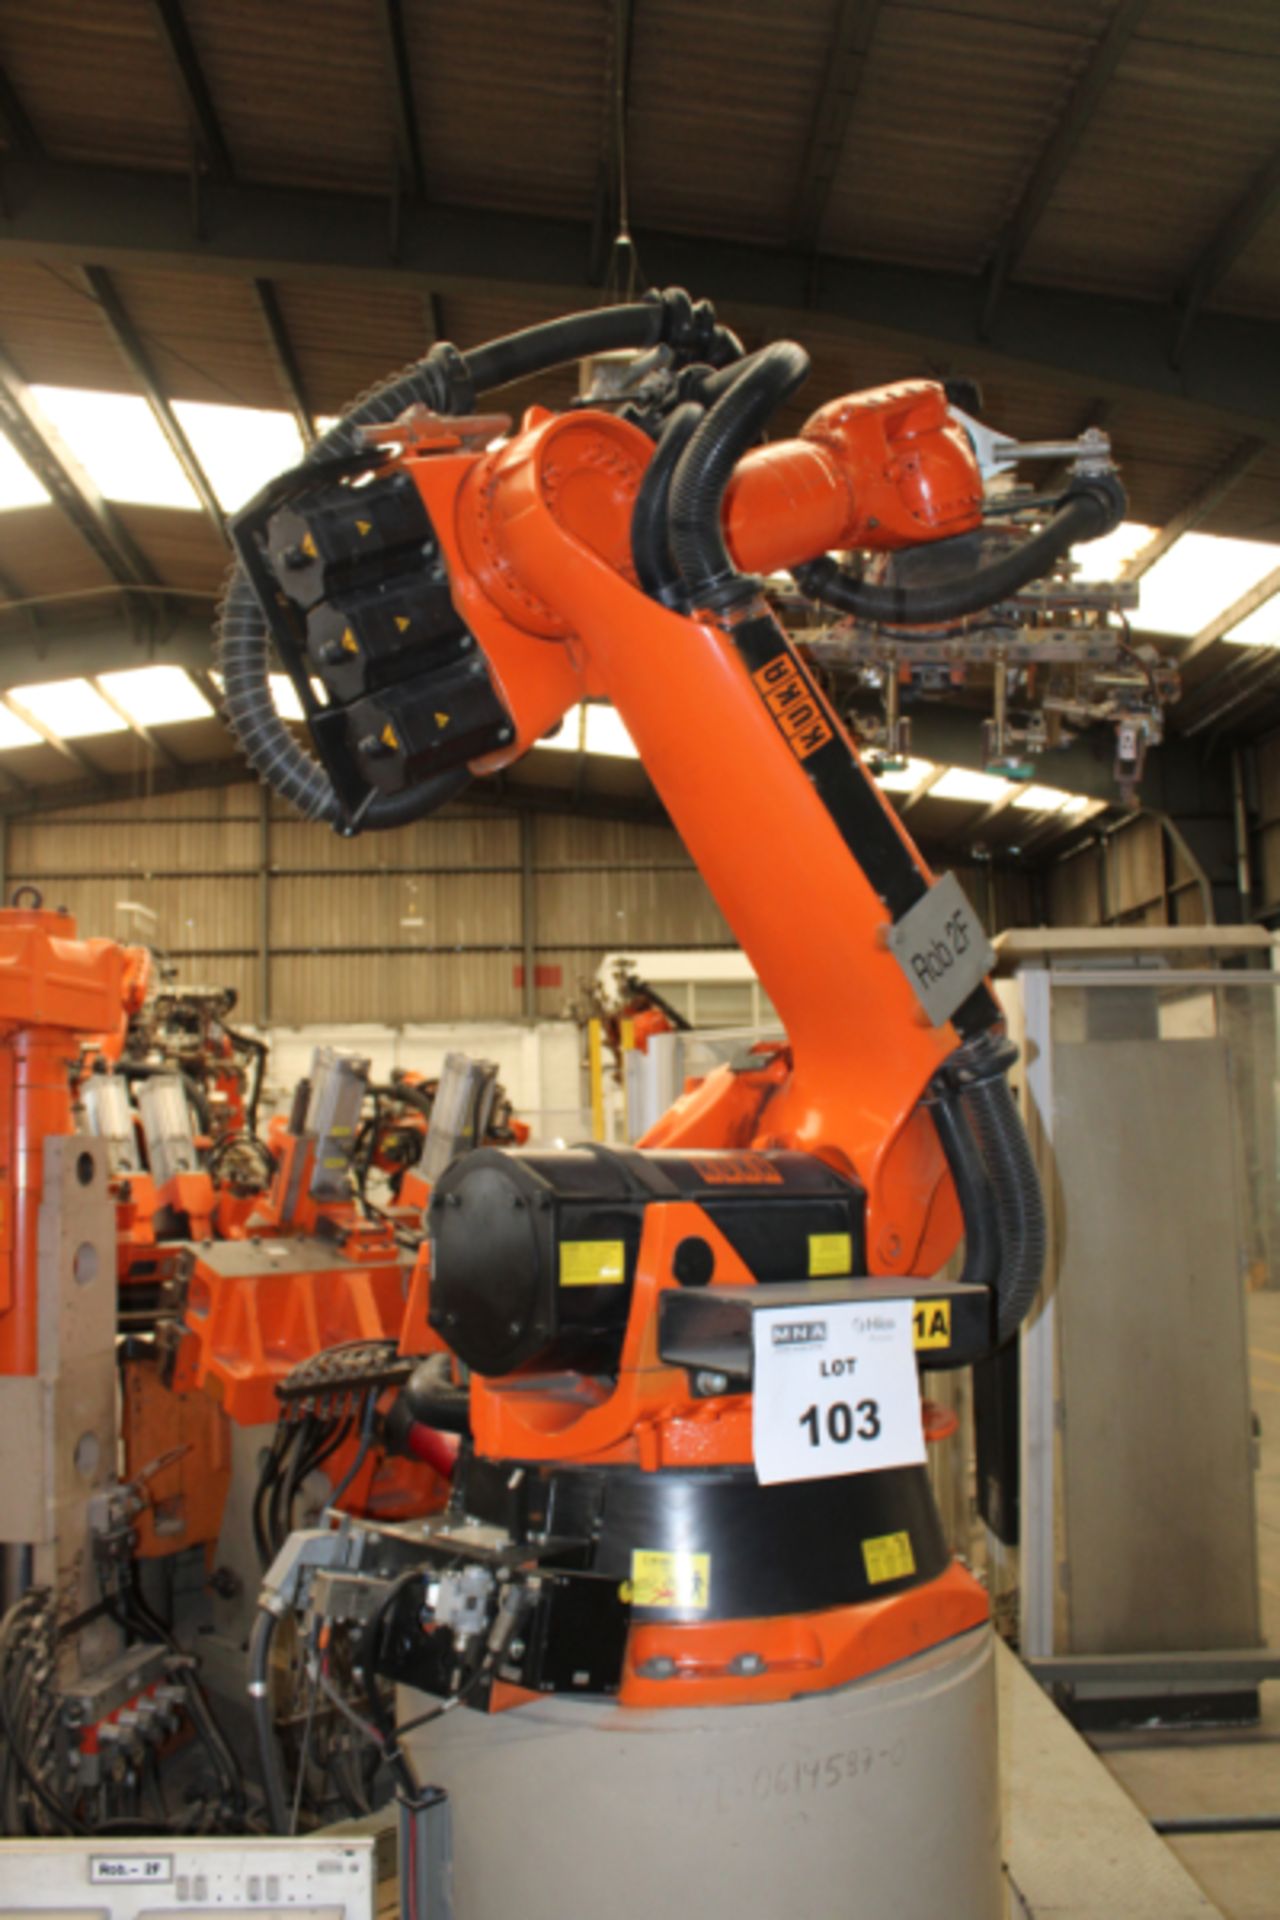 Kuka KR210L150 Robot, Maximum Reach: 3,100 mm, Rated Payload: 150 Kg, Robot Controller, New 2003 - Image 2 of 3